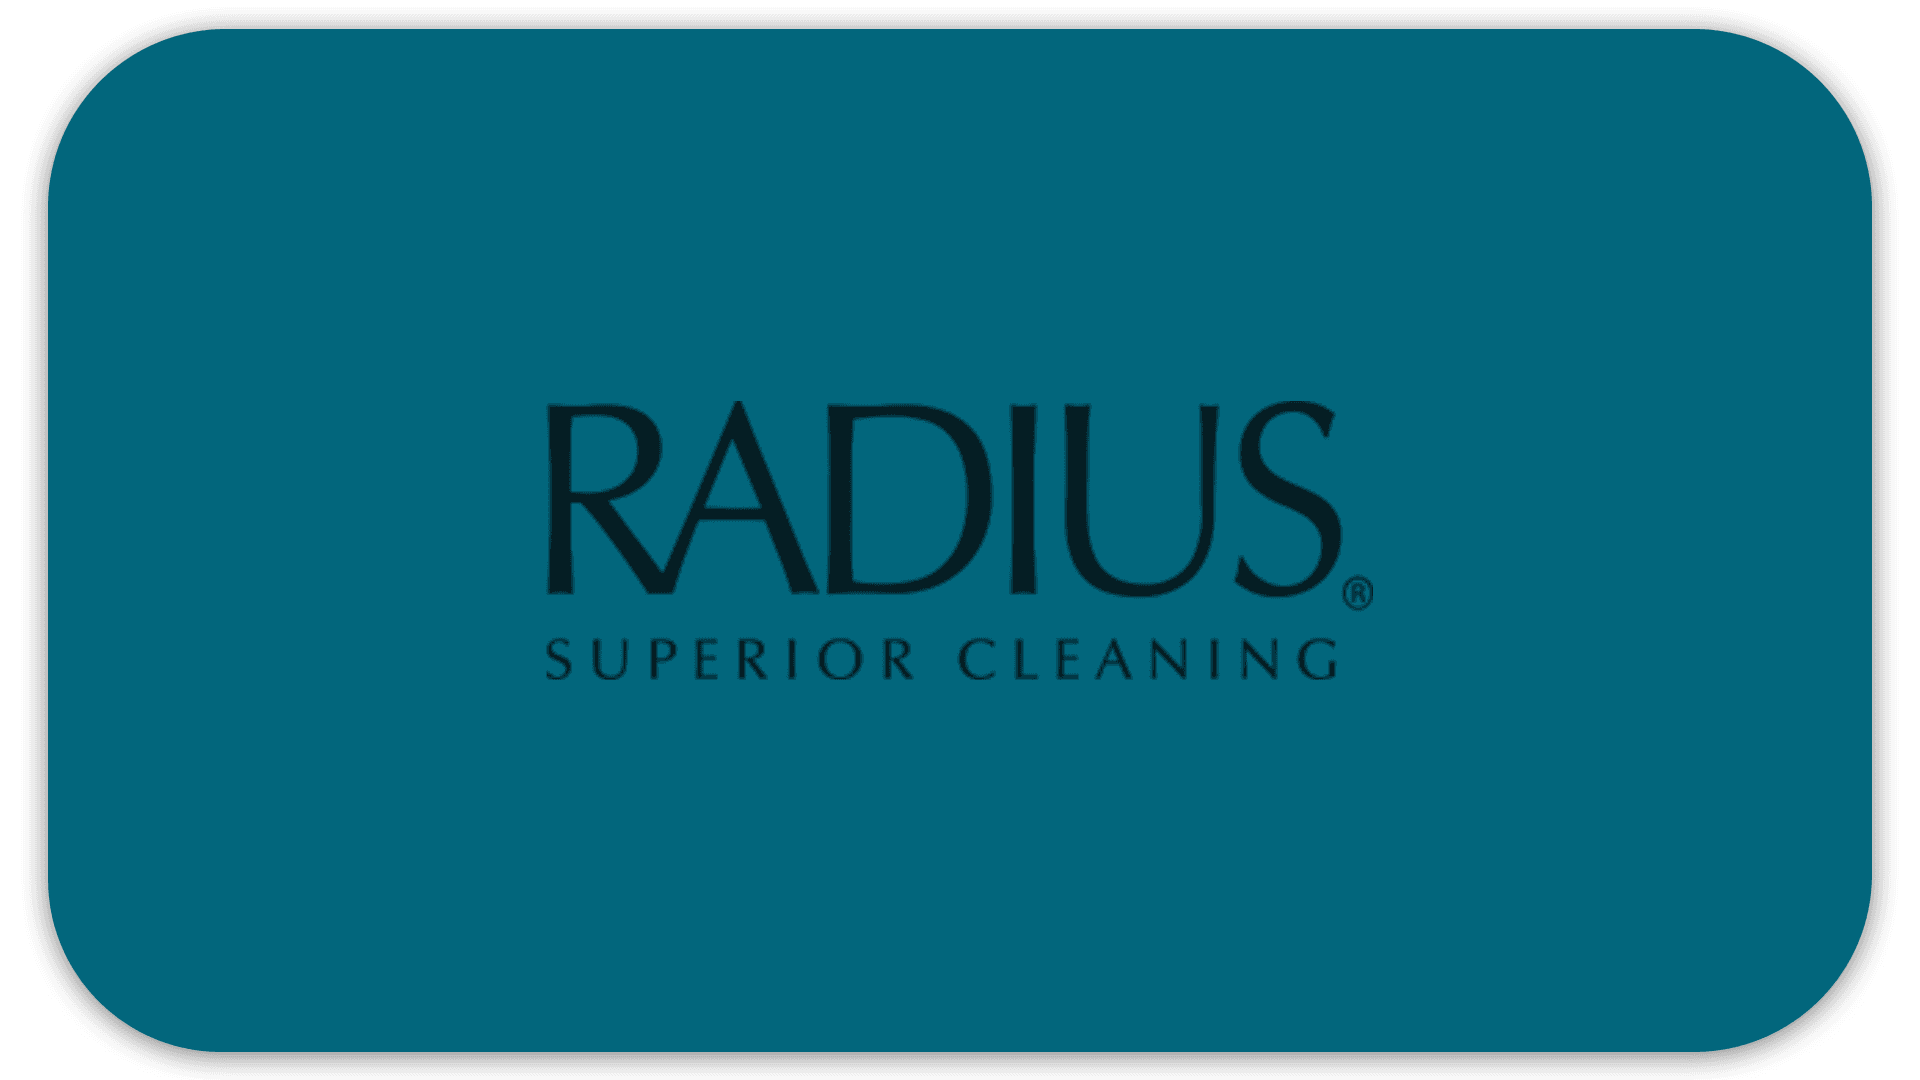 Radius Superior Cleaning logo on a teal background.